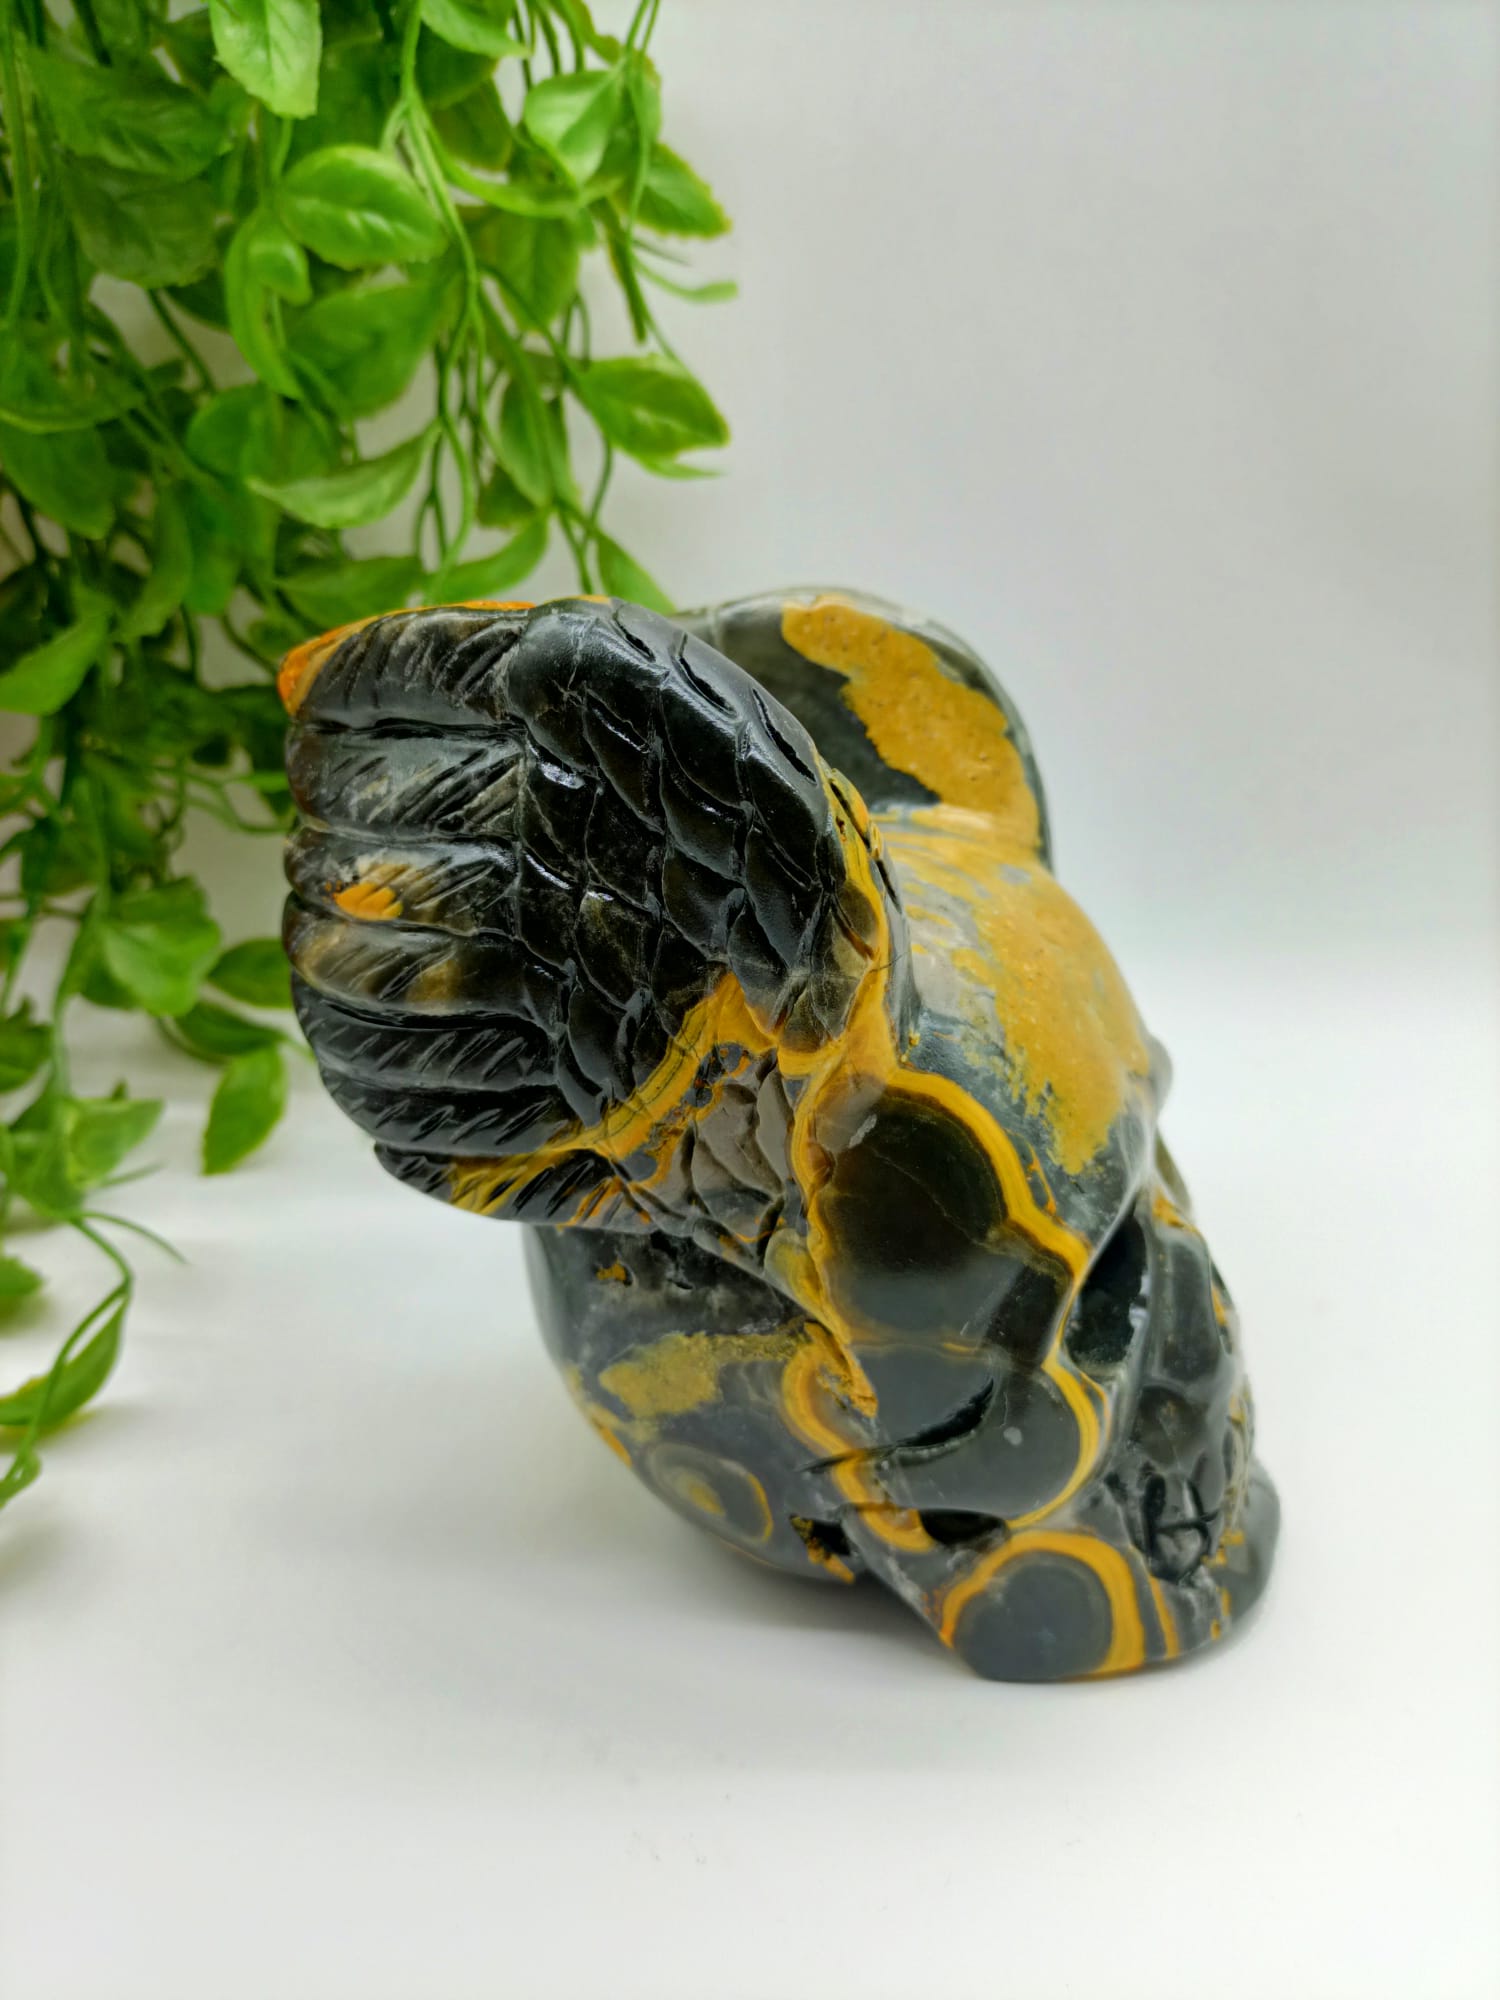 Bumblebee Jasper Skull with Wings 1.554 Kgs (Special 30% OFF)

